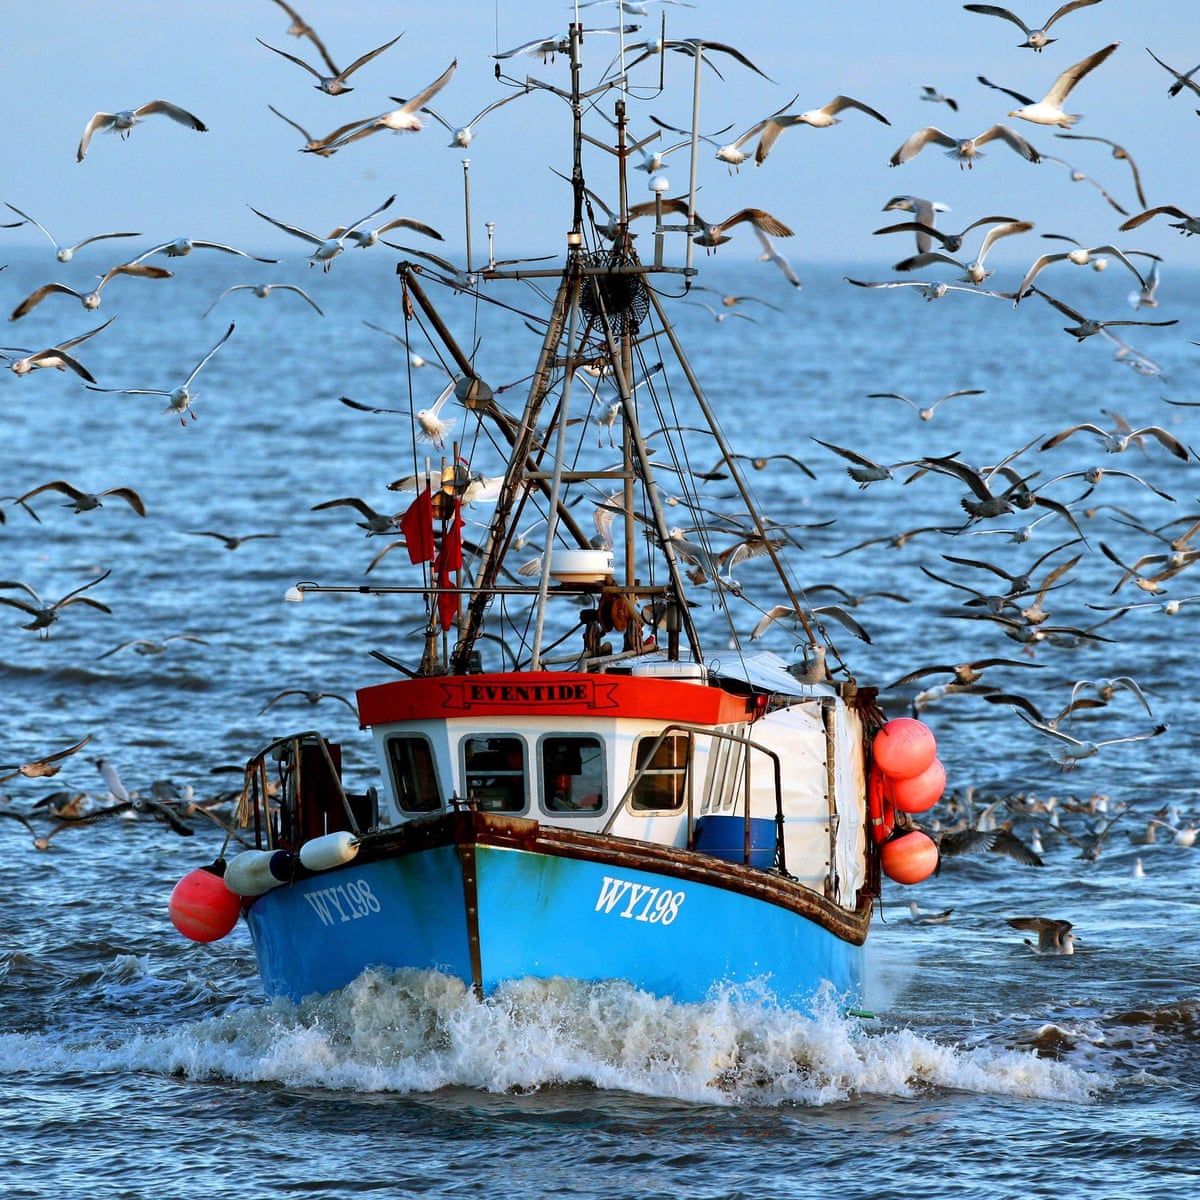 Reduce EU quotas to stop overfishing | Letters | The Guardian